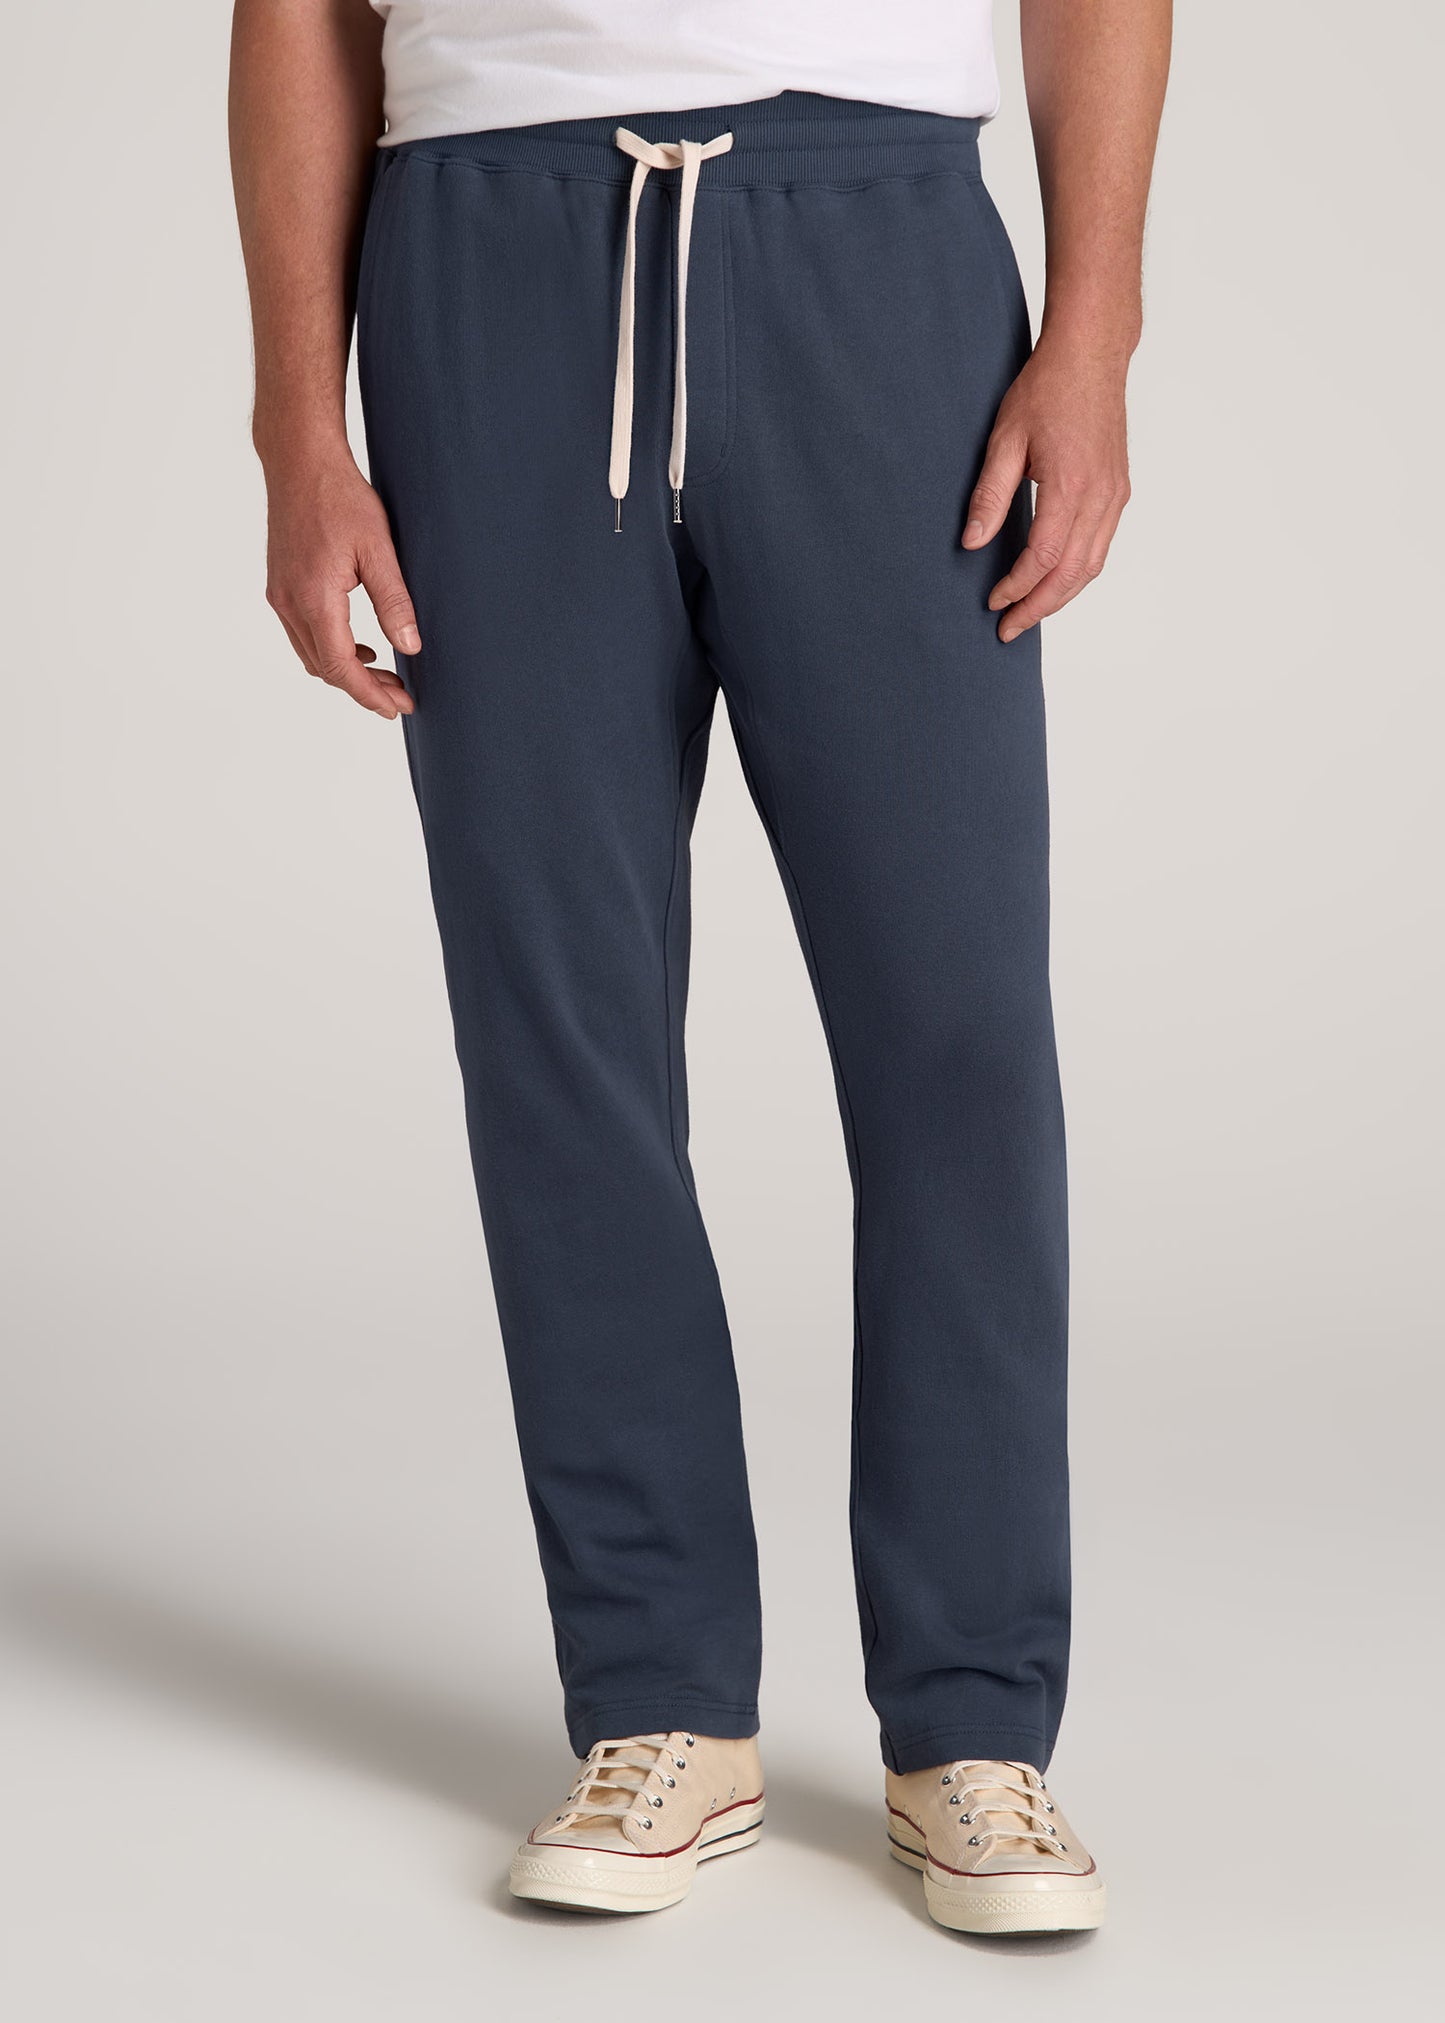 A tall man wearing American Tall's LJ&S Brushed Terrycloth Sweatpants for Tall Men in Vintage Midnight Navy.